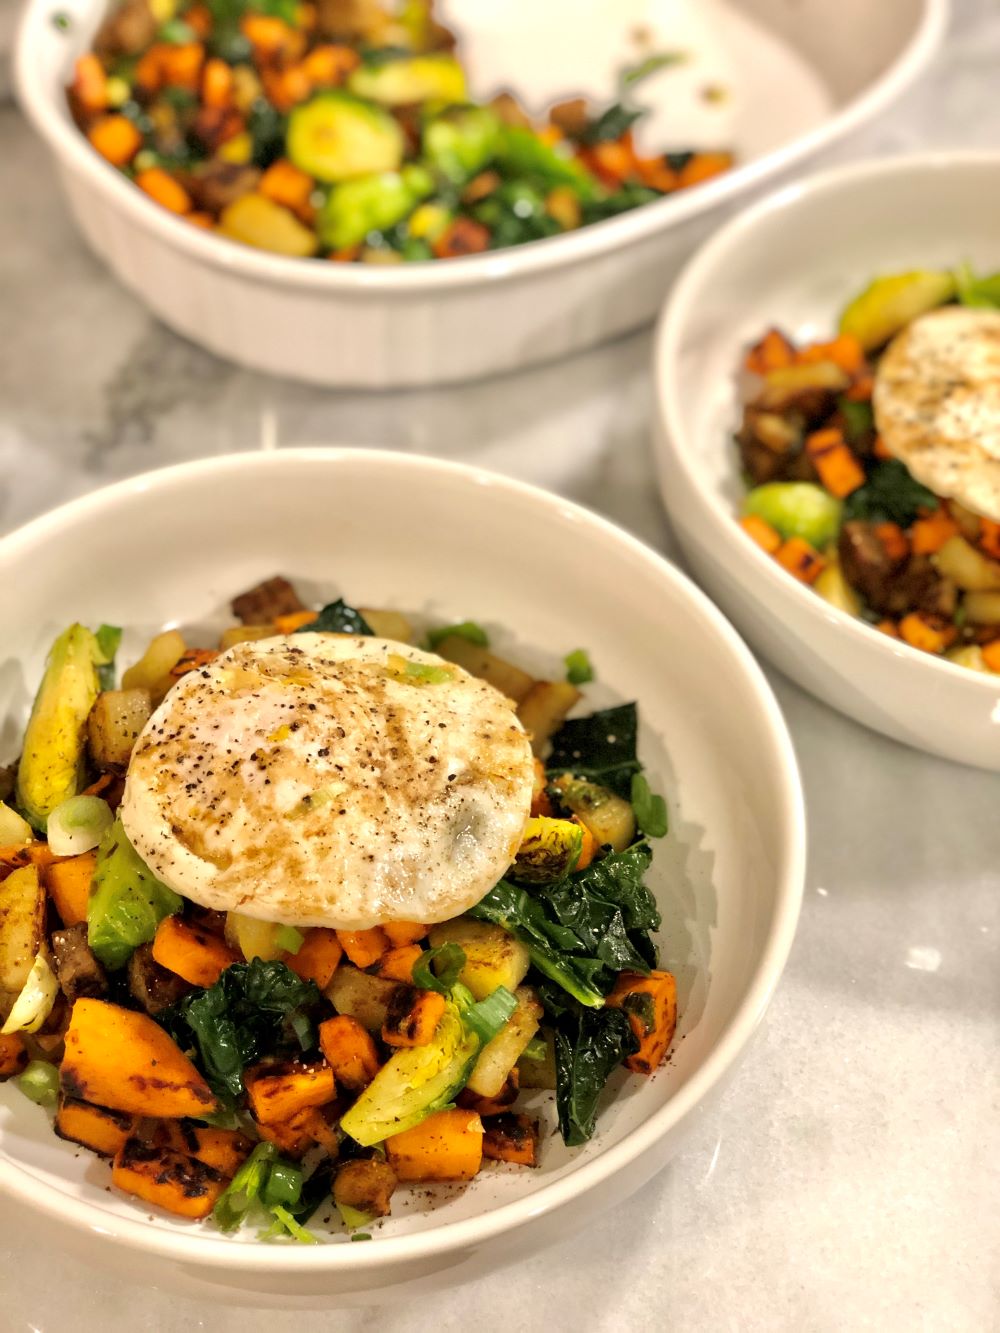 Breakfast Hash Bowls with Sausage and Winter Veggies